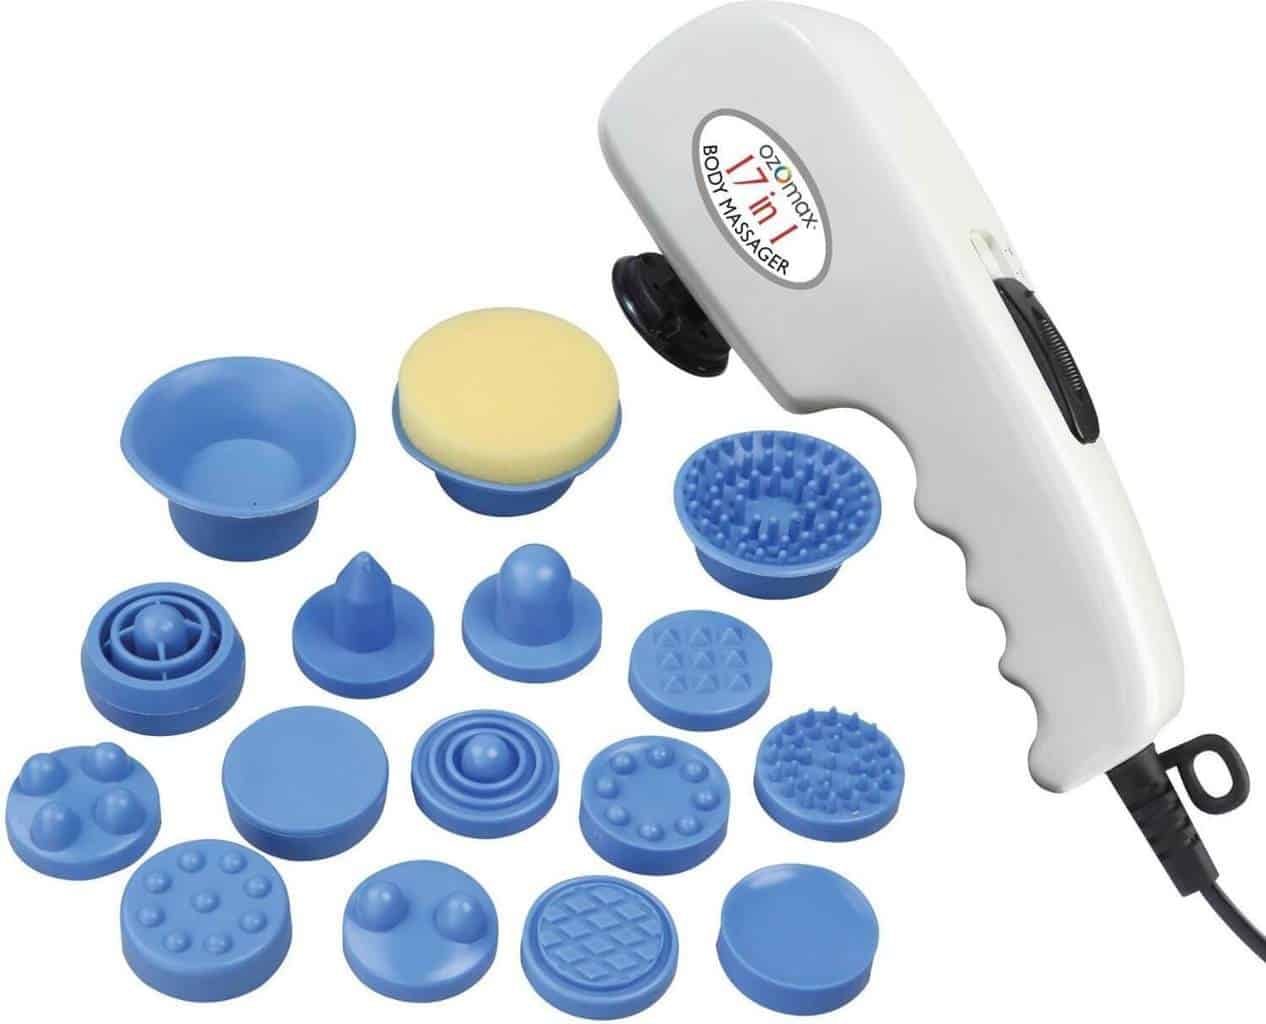 Ozomax Professional 17 in 1 Top Body Massager Review